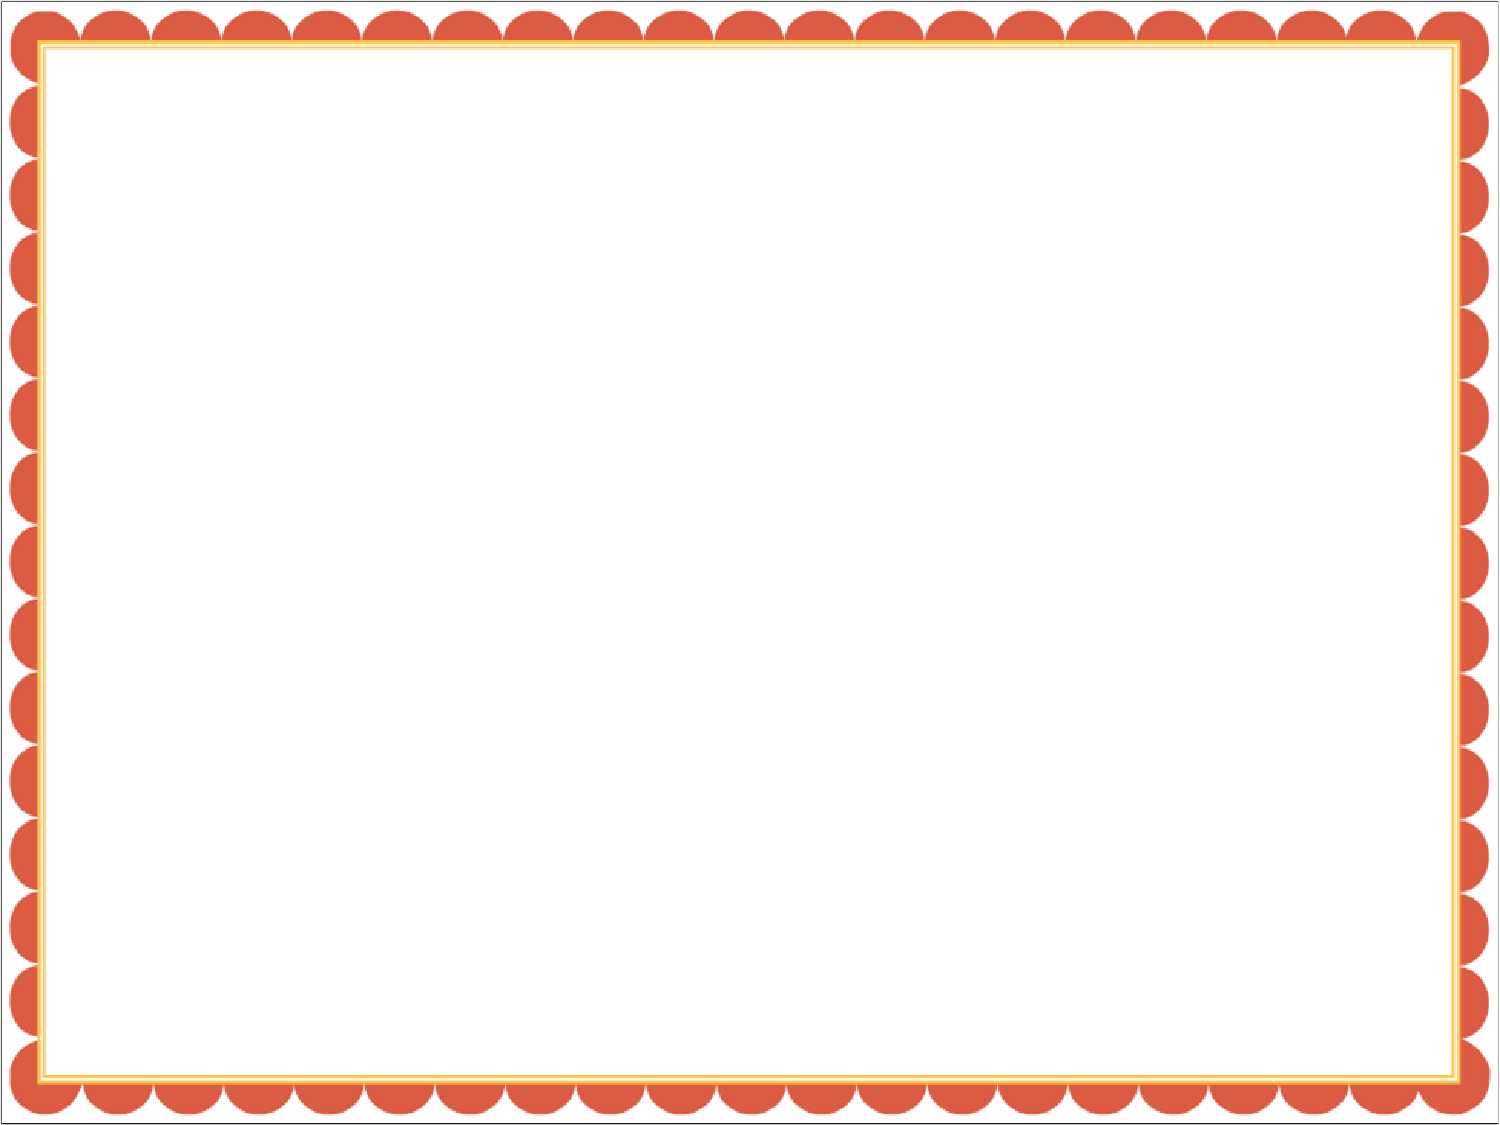 Certificate Borders Templates Free - ClipArt Best